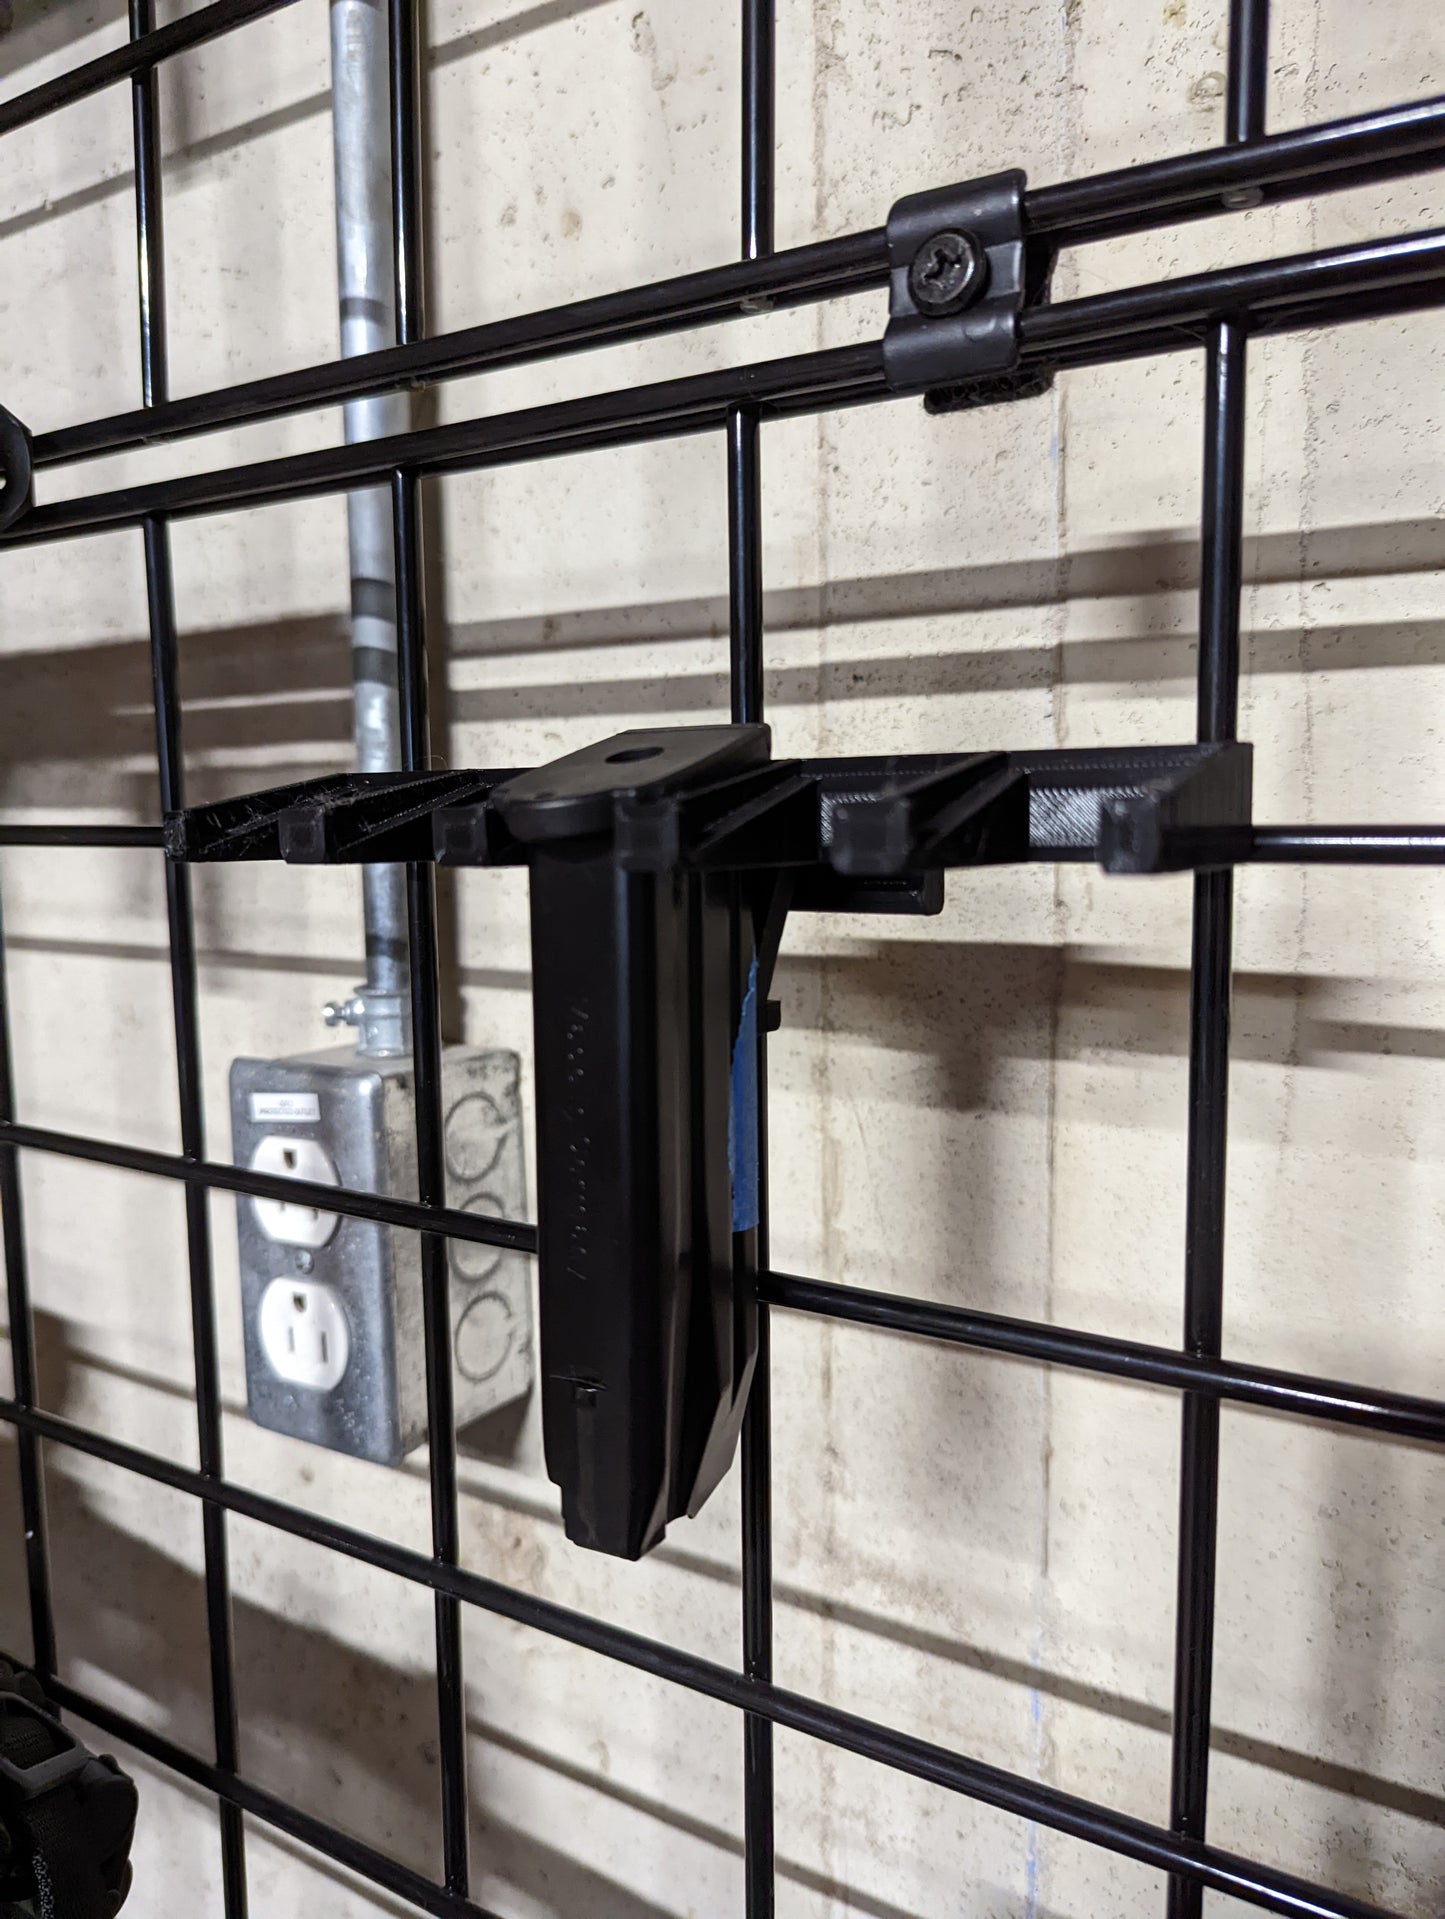 Mount for HK P30 / VP9 / P2000 Mags - Gridwall | Magazine Holder Storage Rack